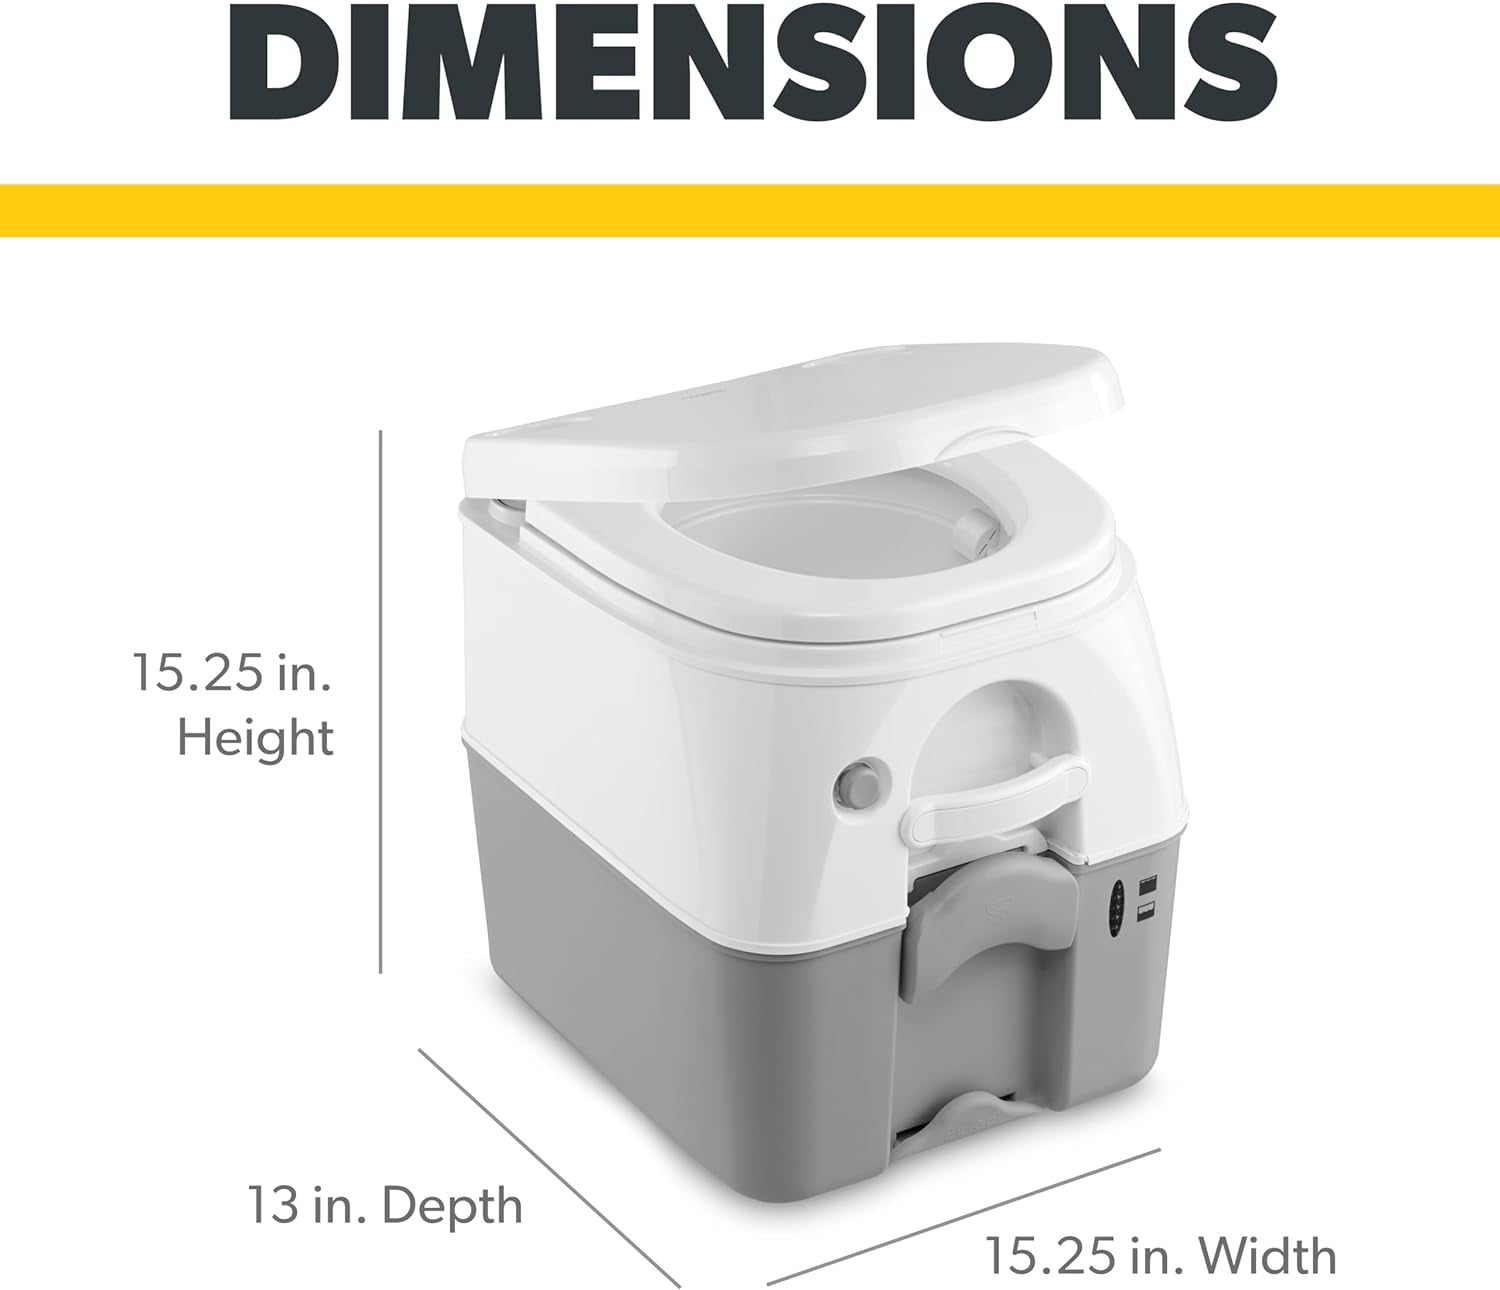 Dometic 976 Portable Toilet - Camping Porta Potty with Full-Size Seat & Latching Lid - Powerful Push-Button Pressurized Flush Commode - 5 Gallon Waste Tank